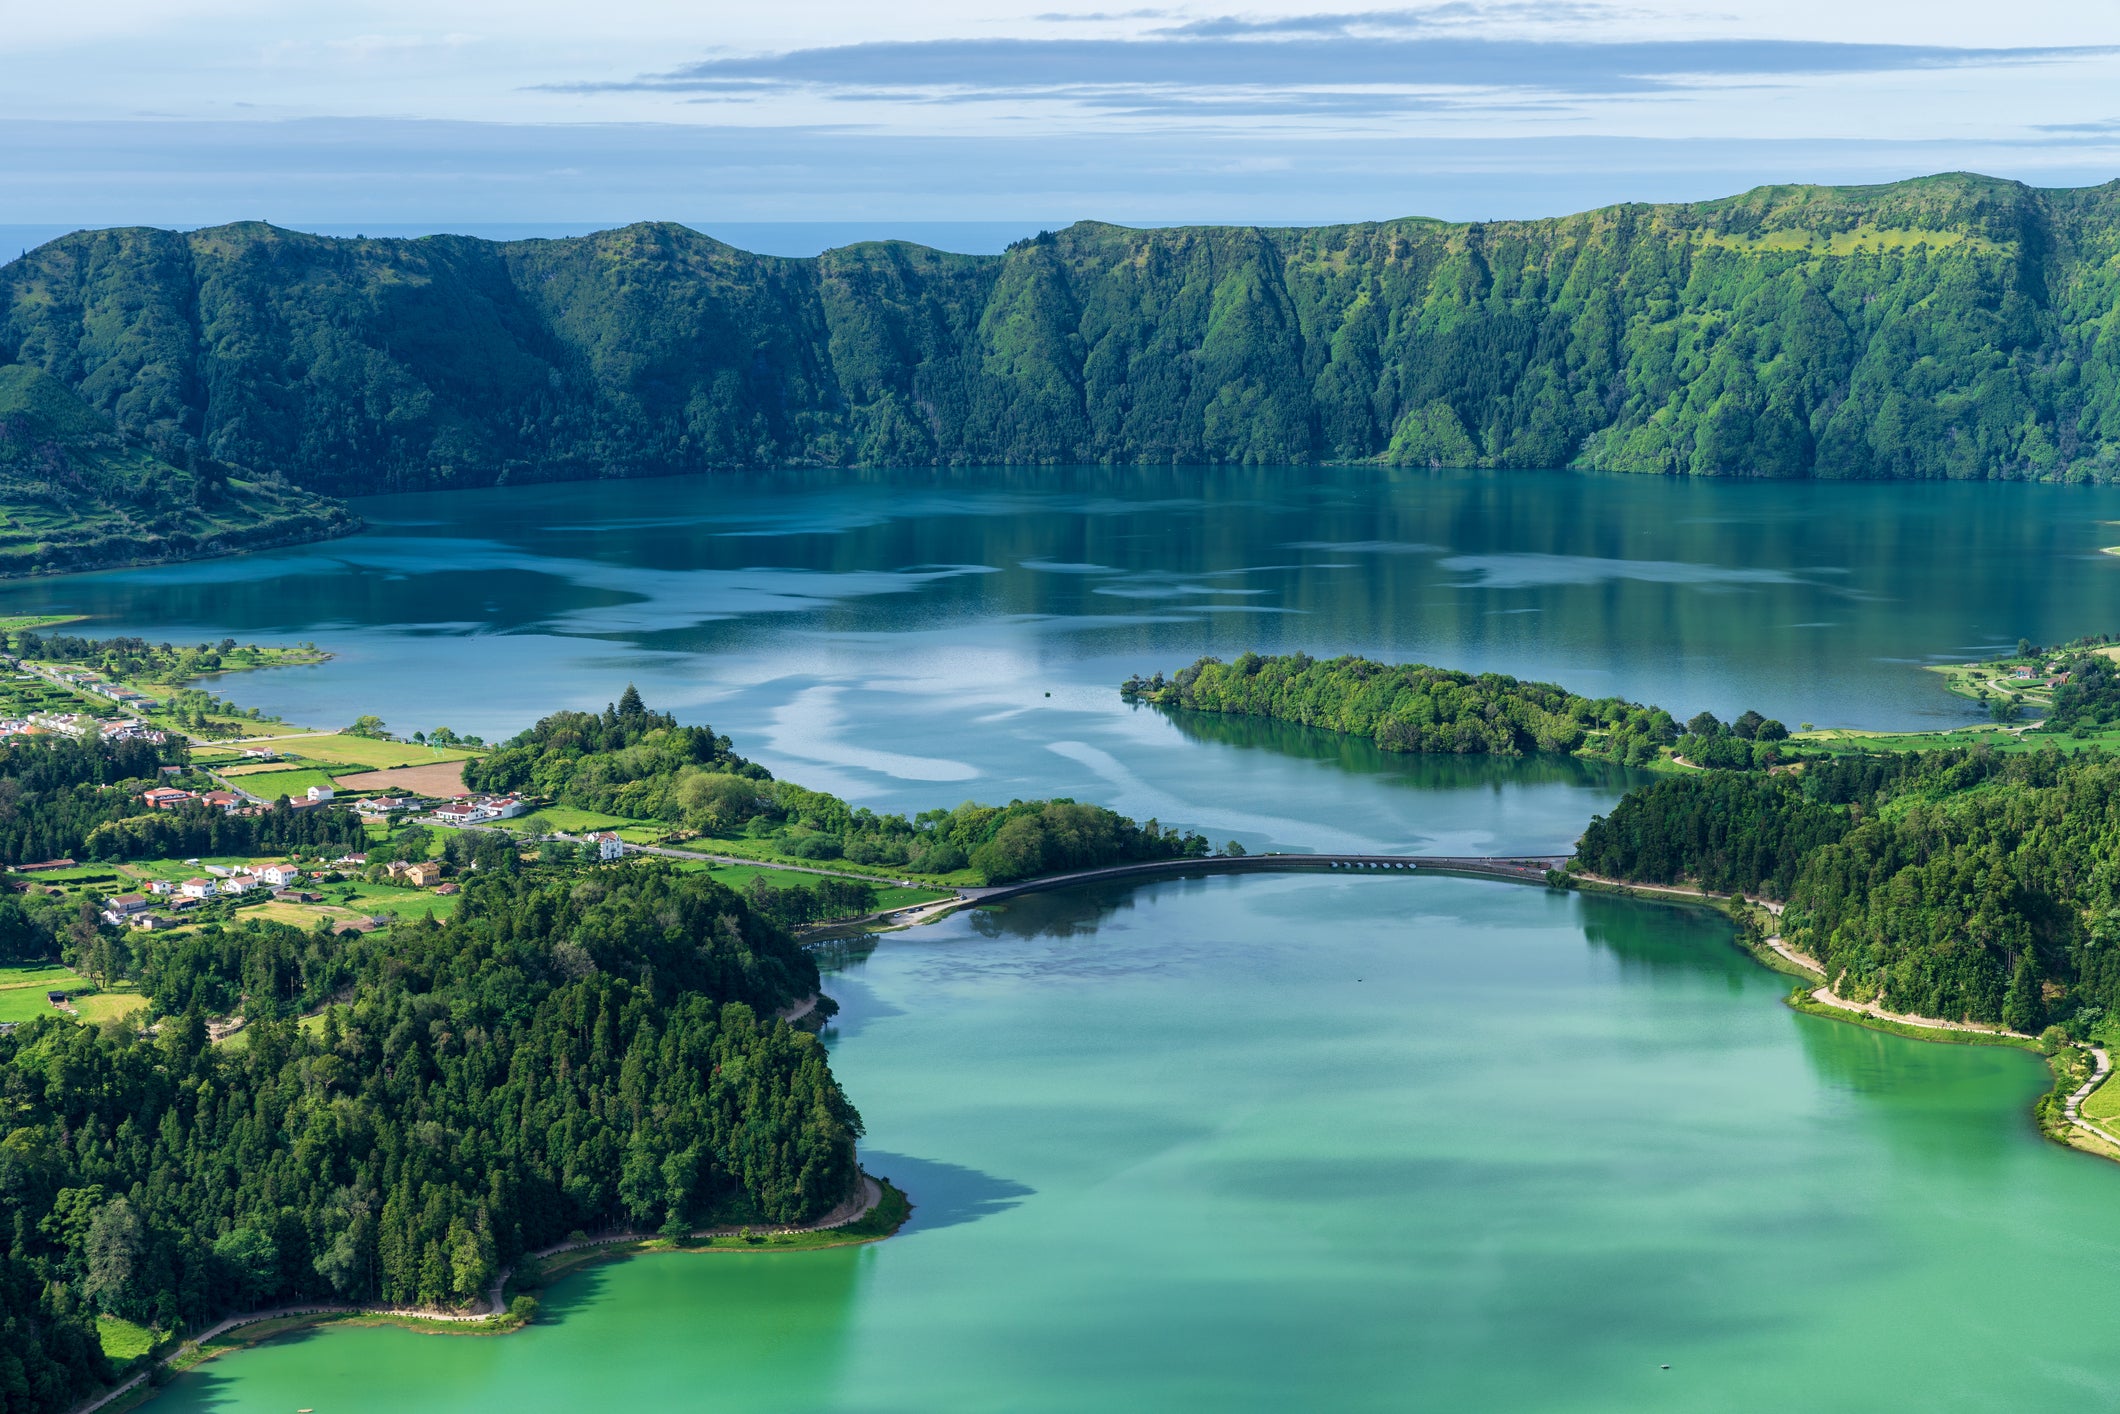 Fly from New York and Boston to the Azores for as little as 4